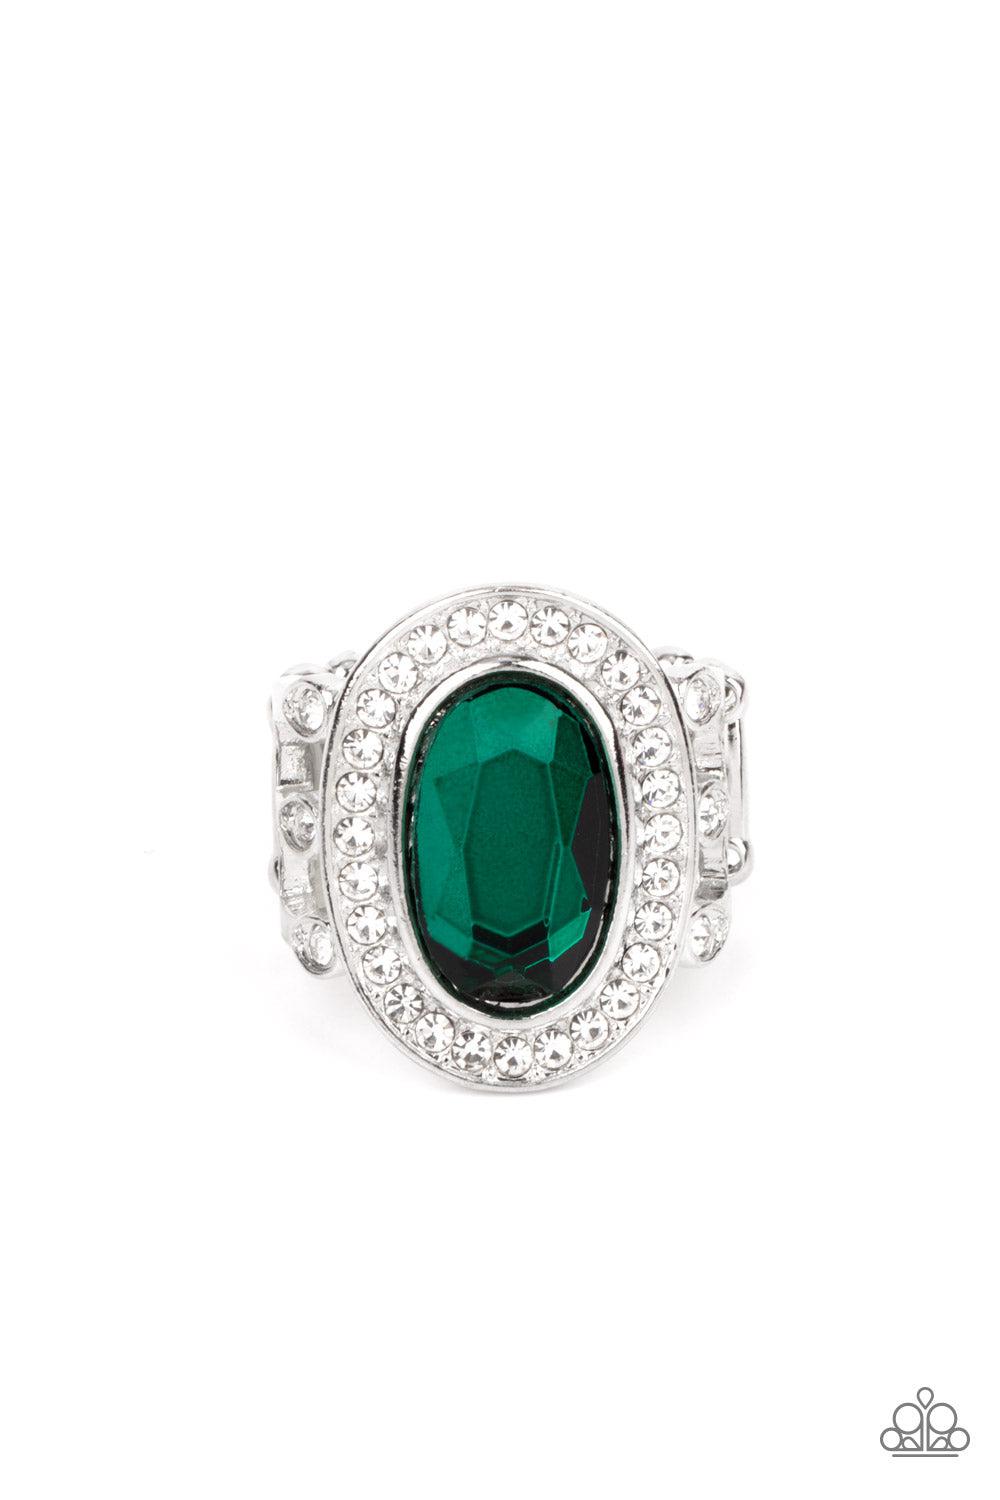 Always OVAL-achieving Green Rhinestone Ring - Paparazzi Accessories- lightbox - CarasShop.com - $5 Jewelry by Cara Jewels